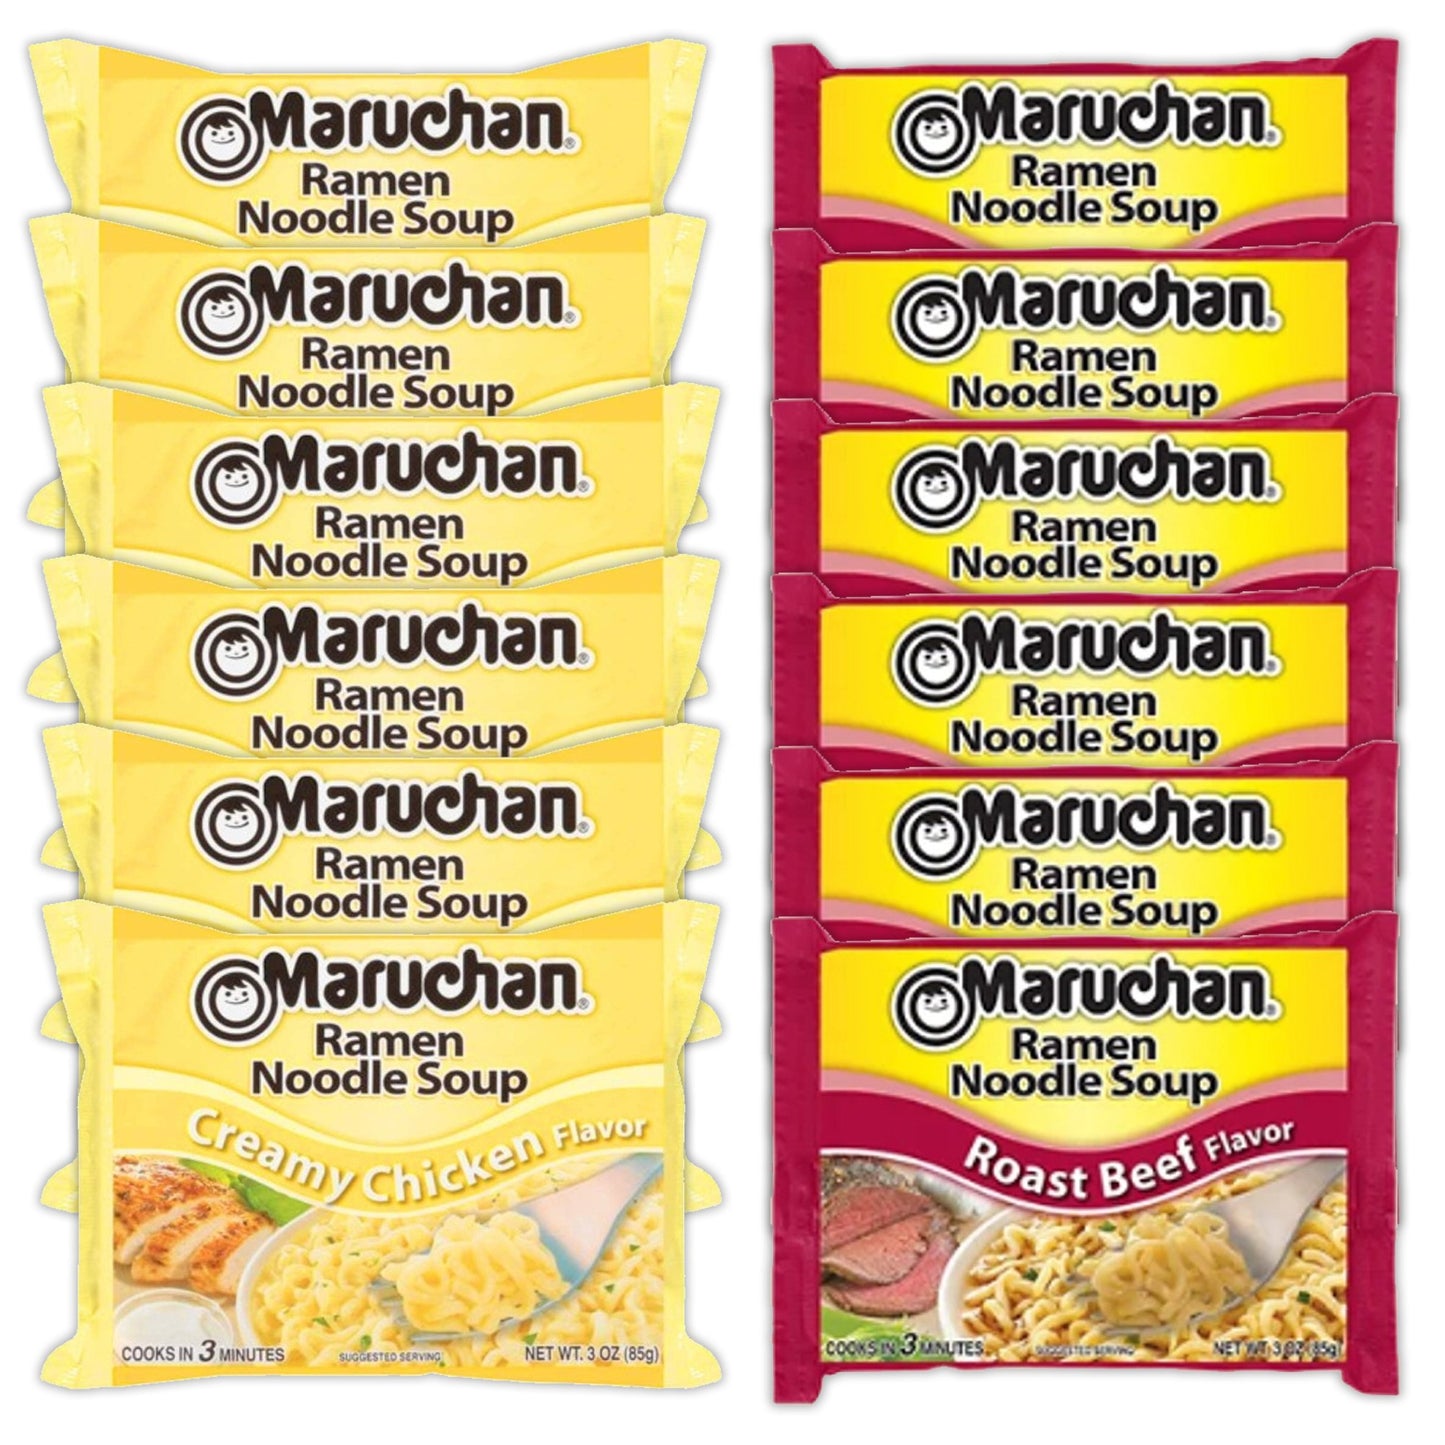 Maruchan Ramen Instant Noodle Soup Variety, 2 Flavors - 6 Packs Creamy Chicken & 6 Packs Roast Beef , 3 Ounce Single Servings Lunch / Dinner Variety